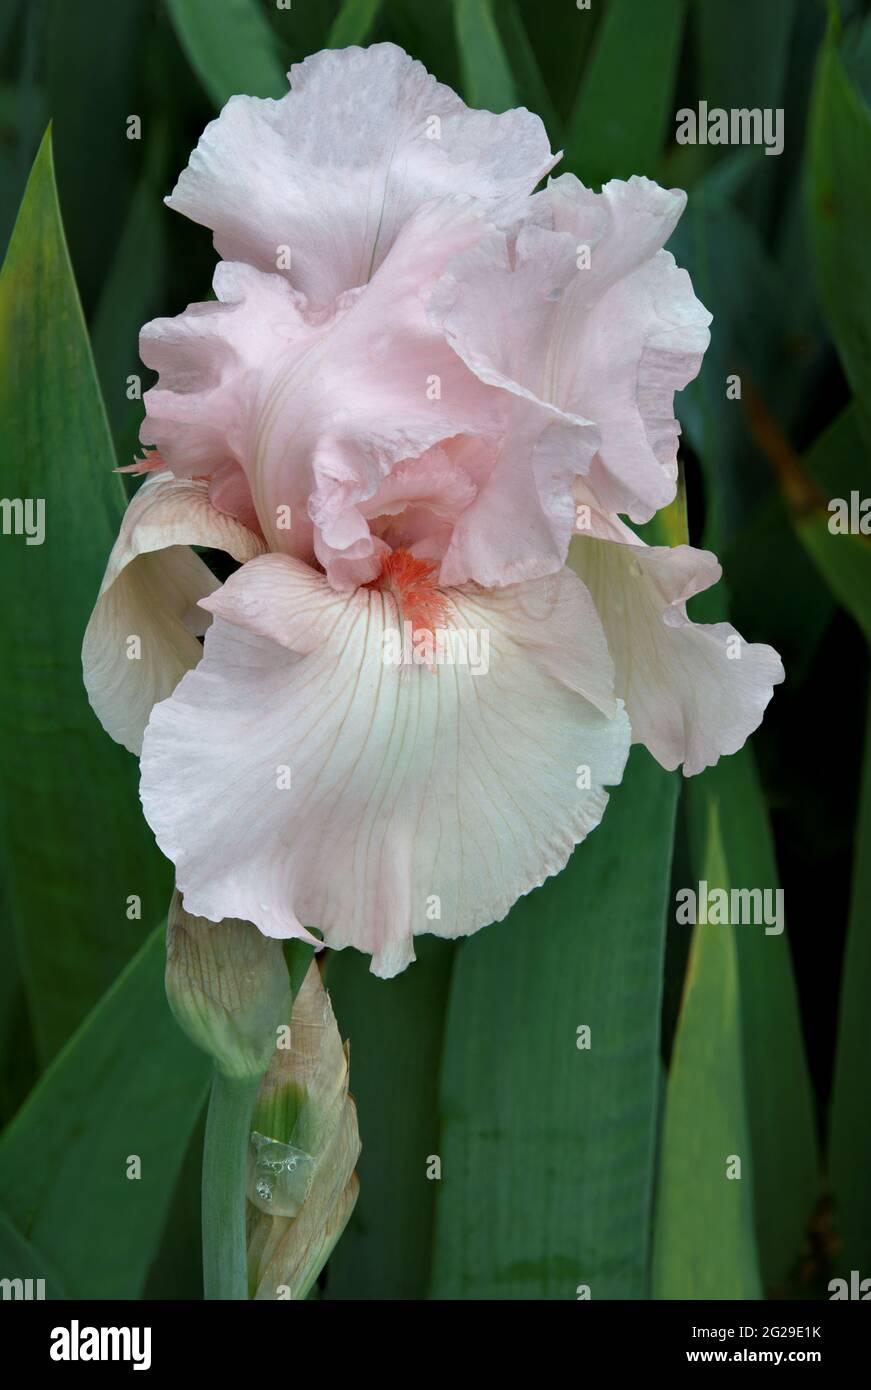 Lovely bearded iris blossom (Iris germanica) with ruffled pink petals and contrasting orange beard against a soft background of green iris leaves. Stock Photo